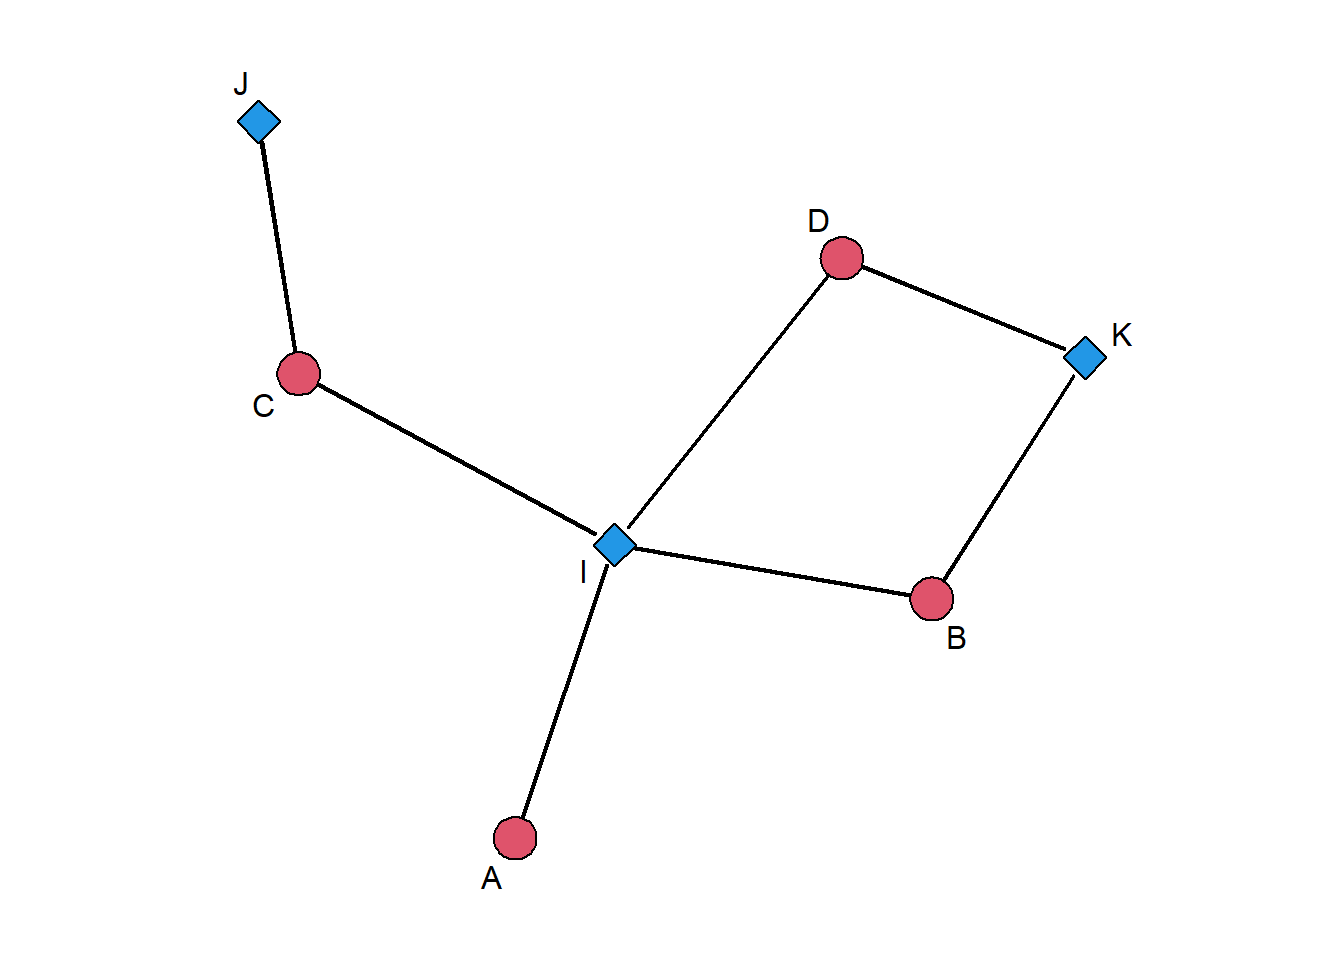 Two-mode (bipartite) network. Note that edges only occur between red nodes (first layer) and blue nodes (second layer).